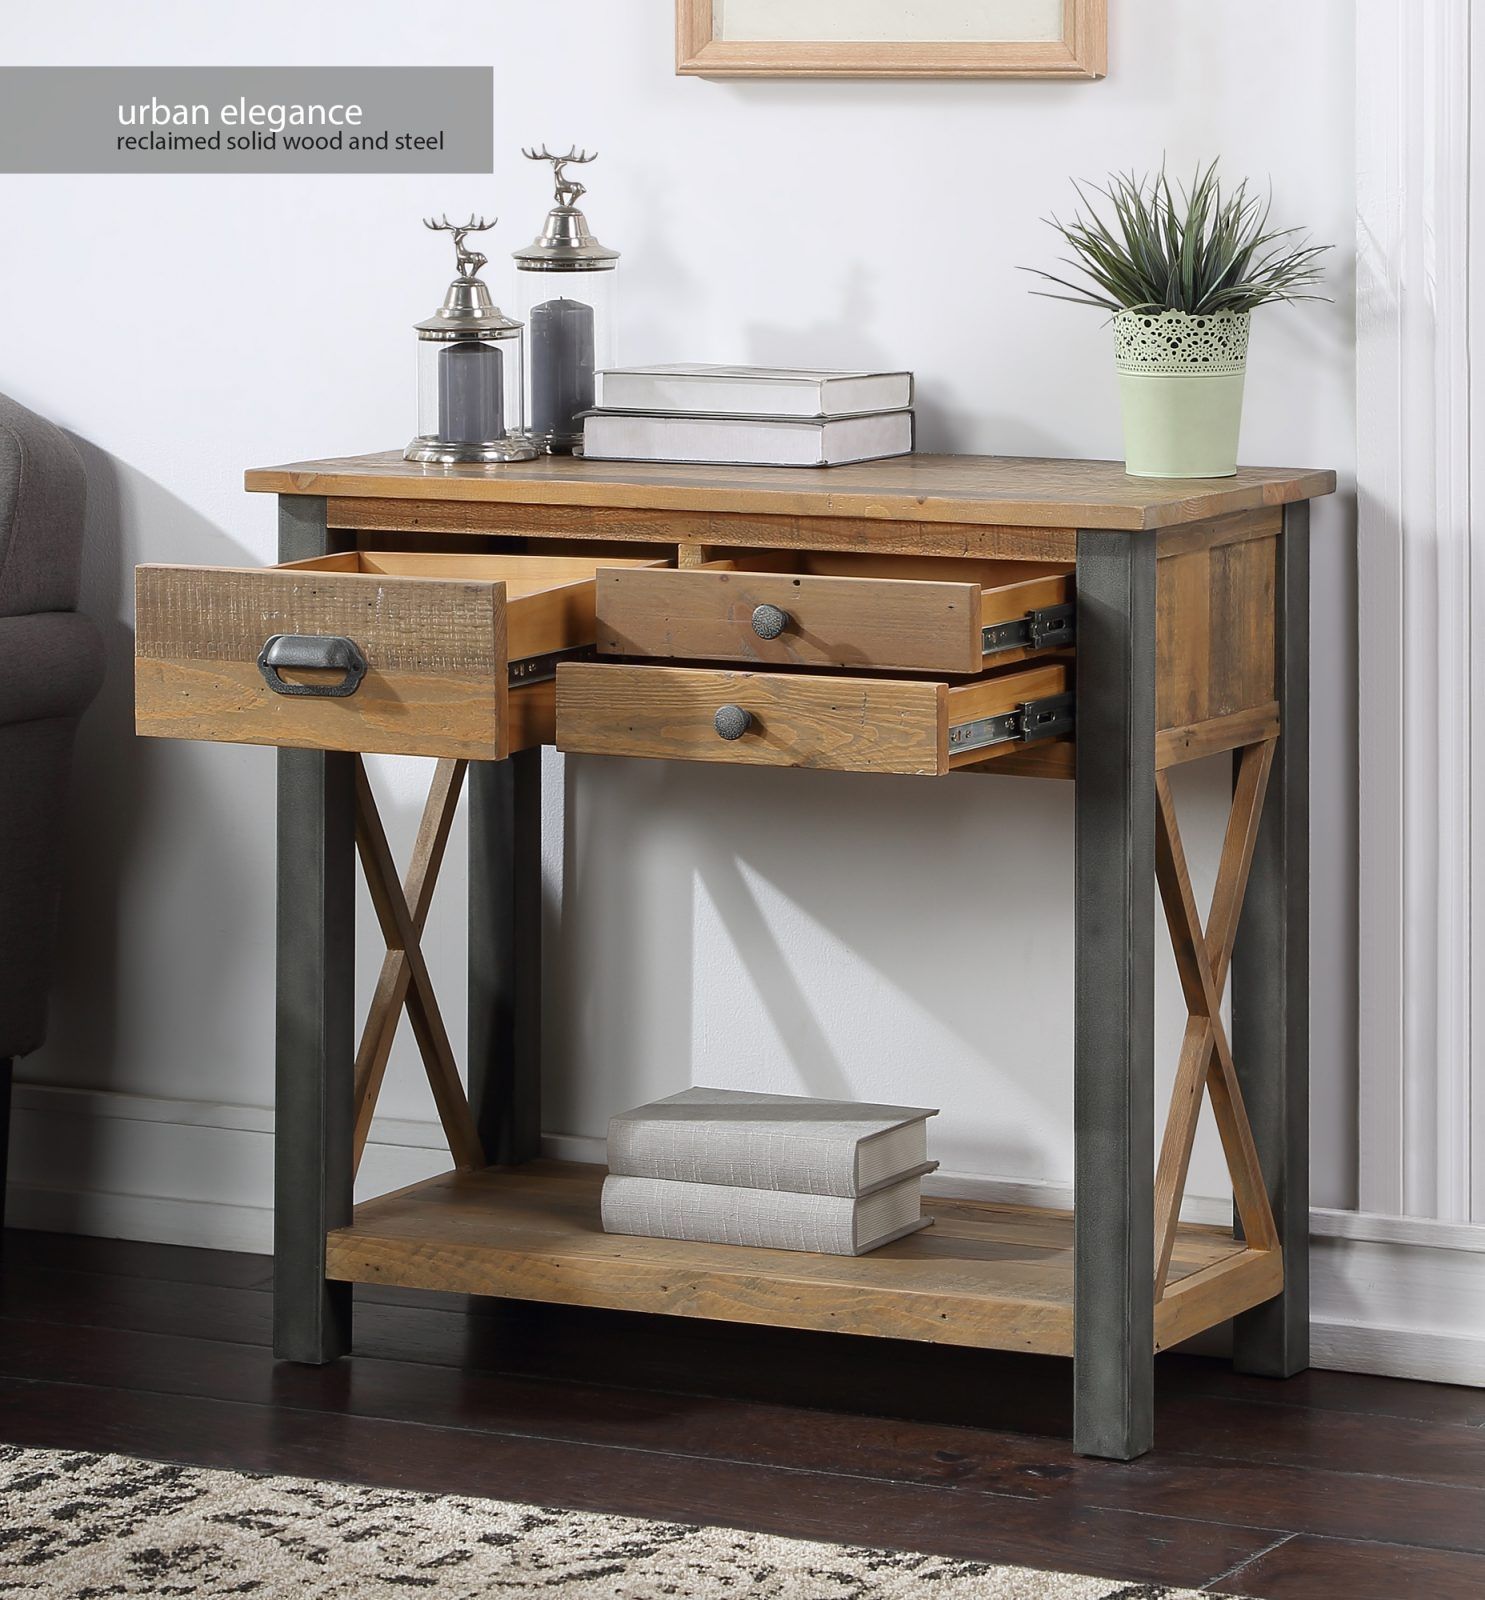 Urban Elegance – Reclaimed Small Console Table – Mango Wood Furniture For Open Storage Console Tables (View 15 of 20)